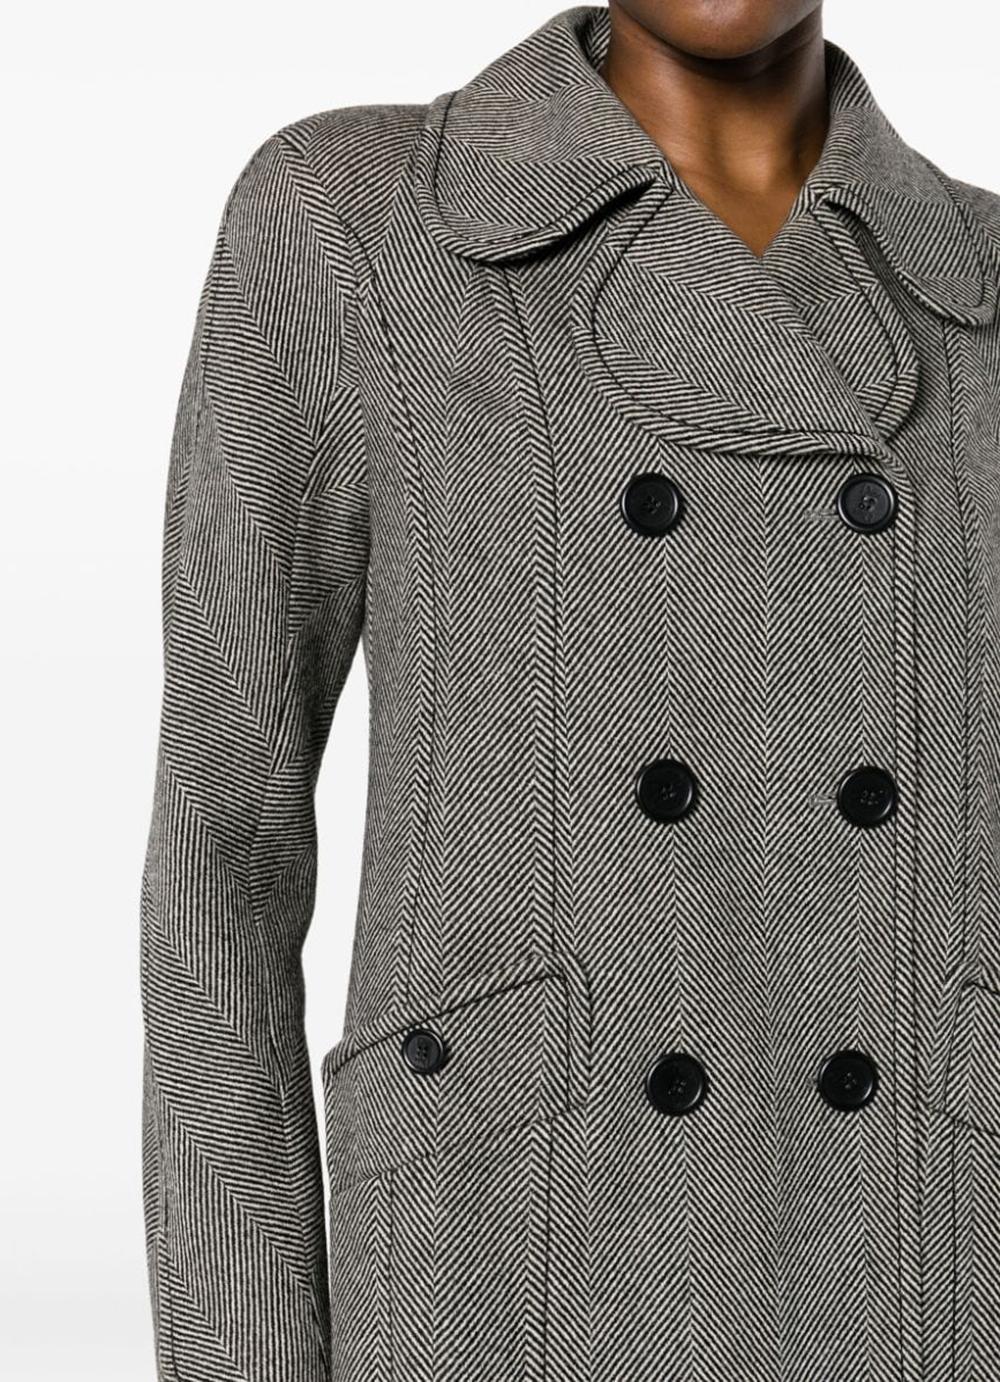 Christian Dior Double-Breasted Coat For Sale 1